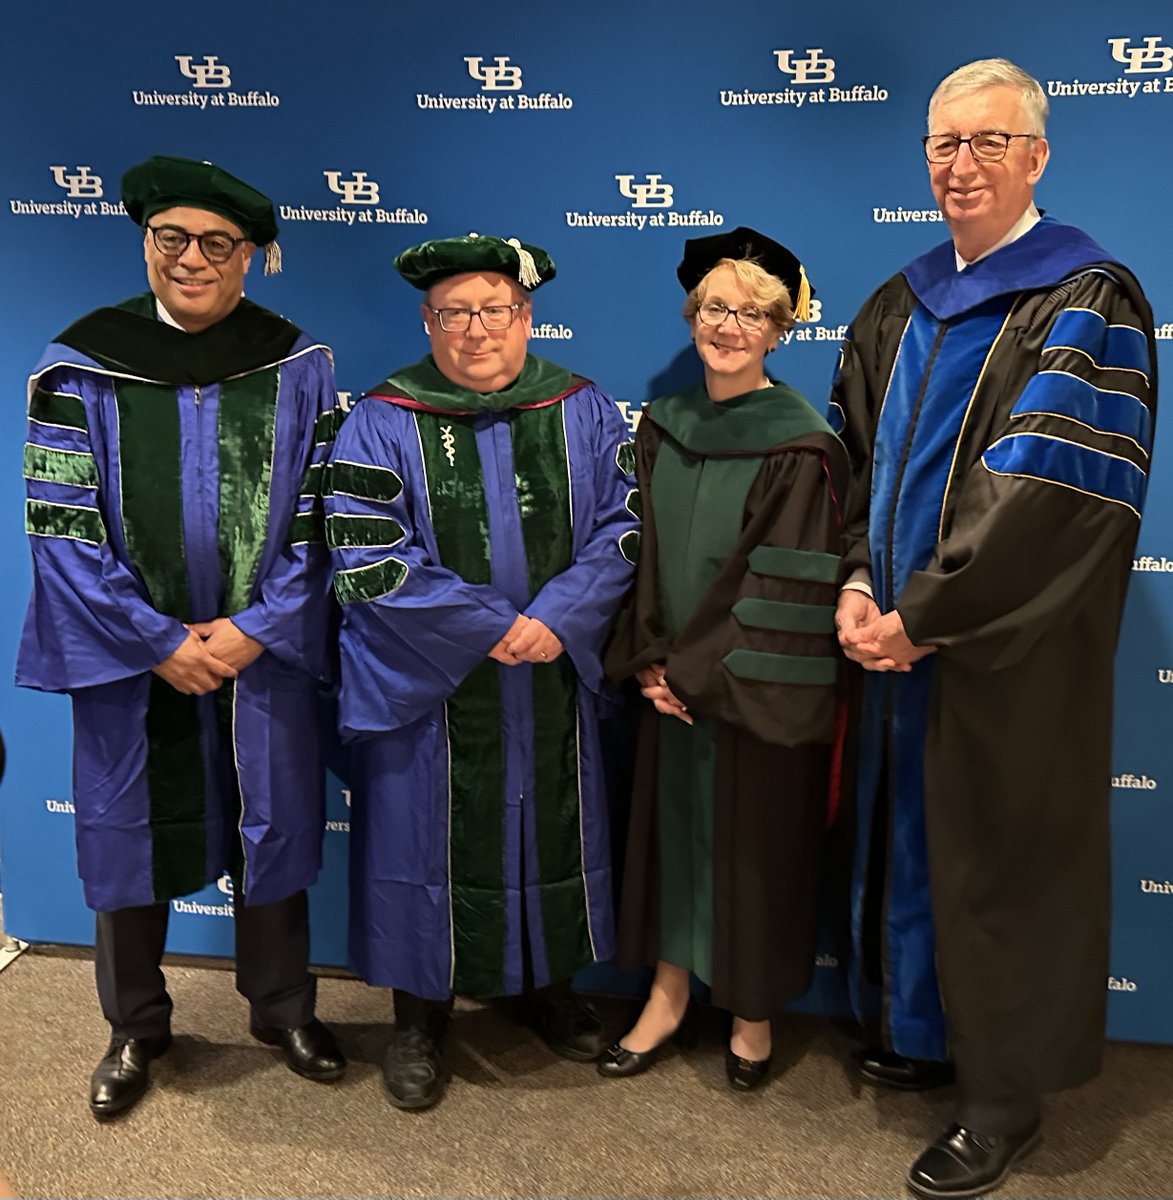 I was honored to be the featured speaker at the commencement for the @Jacobs_Med_UB in Buffalo last week, and urged the new doctors to focus on resilience and joy in their careers.